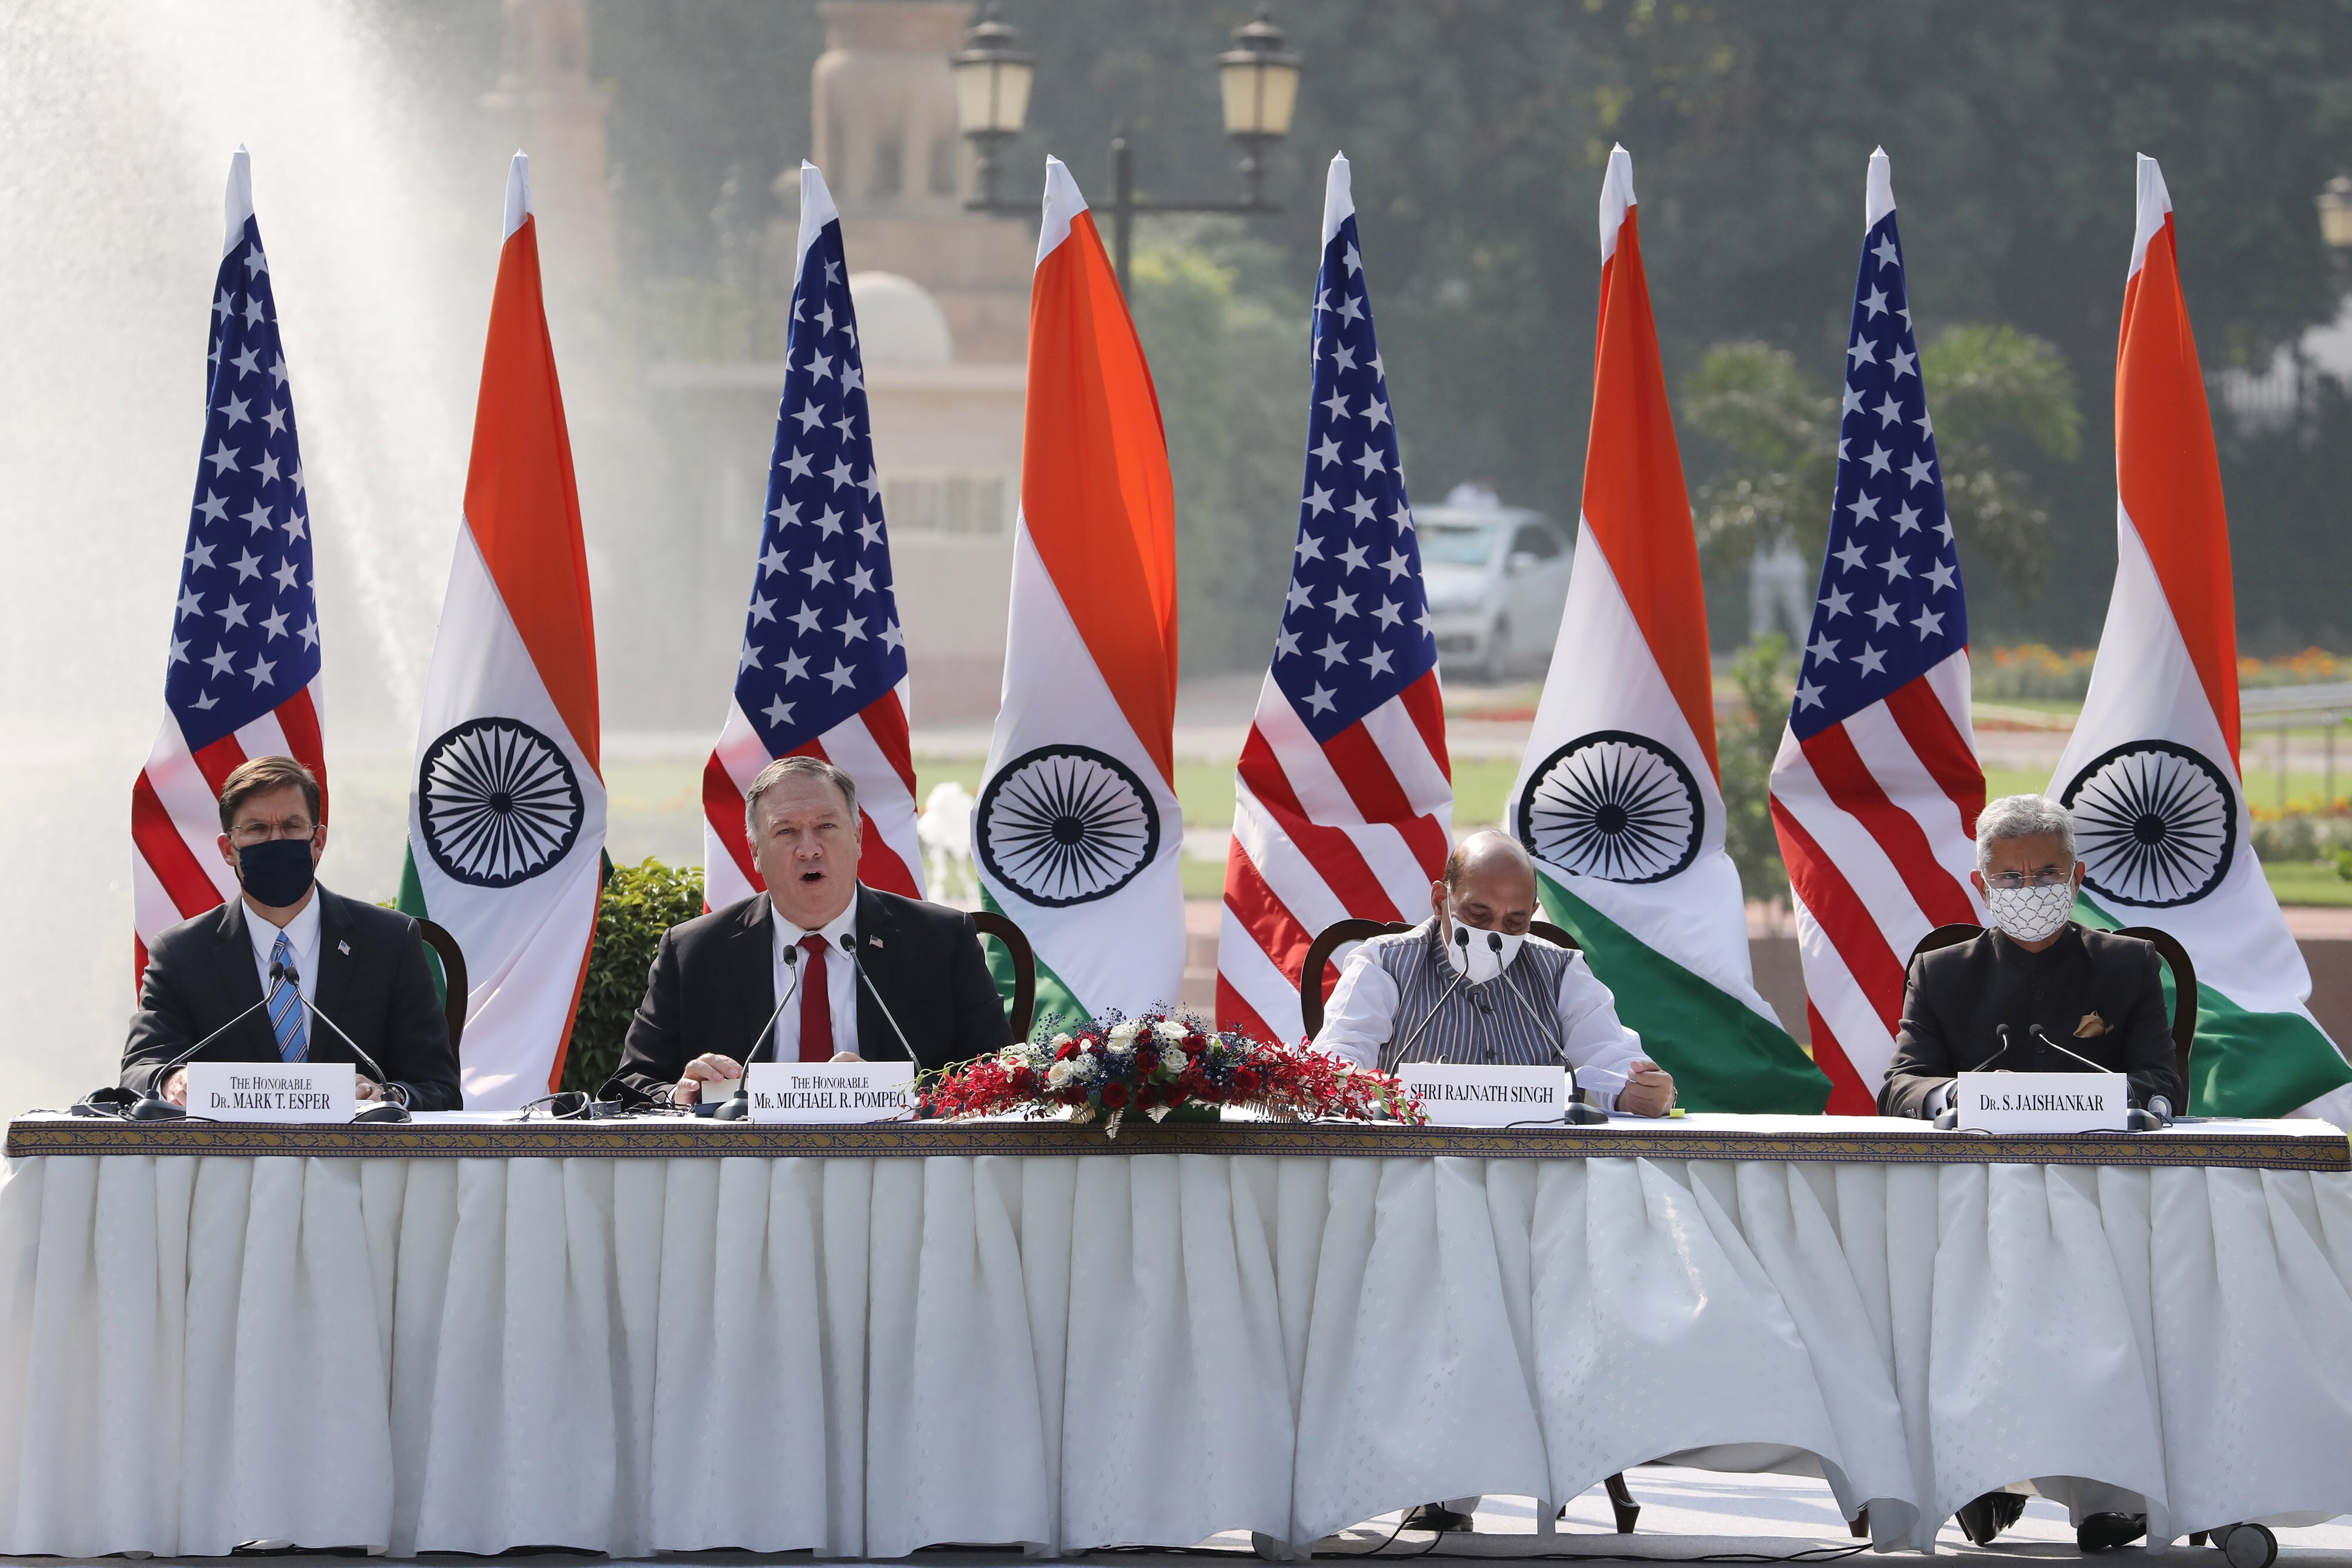 From left, then US defence secretary Mark Esper, US Secretary of State Michael Pompeo, Indian Defence Minister Rajnath Singh and Indian Foreign Minister Subrahmanyam Jaishankar attend a news conference at Hyderabad House in New Delhi on October 26. Photo: Bloomberg